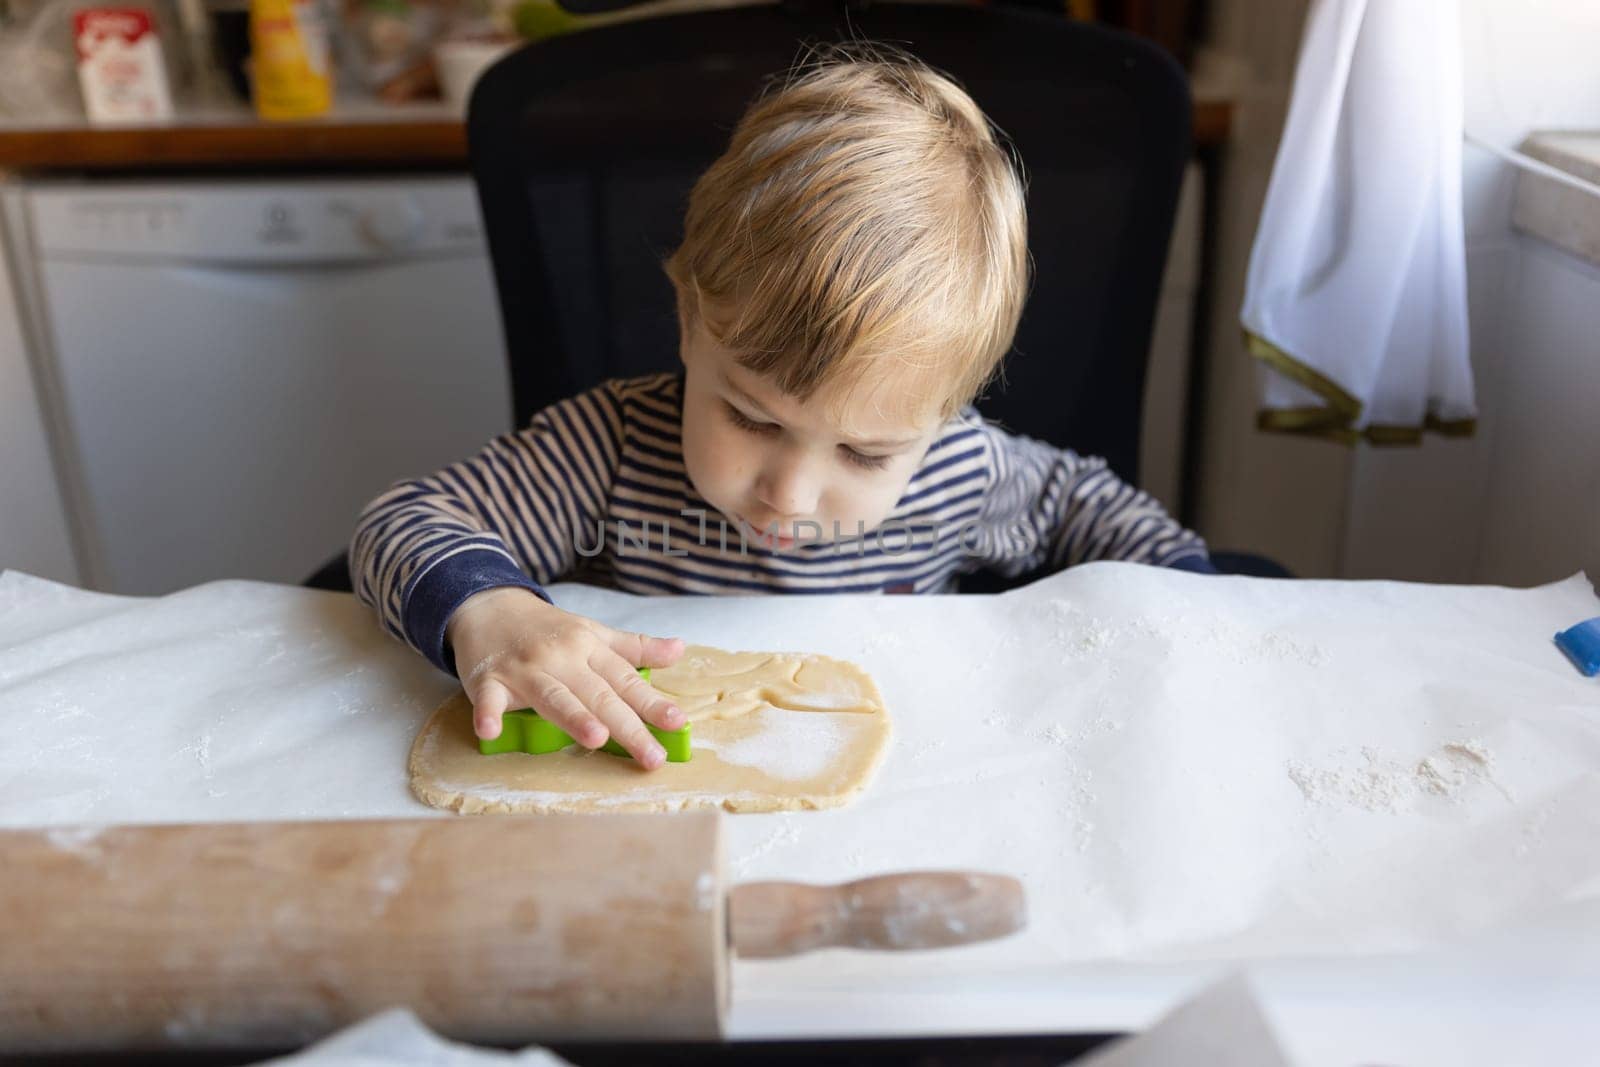 Family cooking - a little boy pushes in a cutting cookie mold onto the raw dough. Mid shot